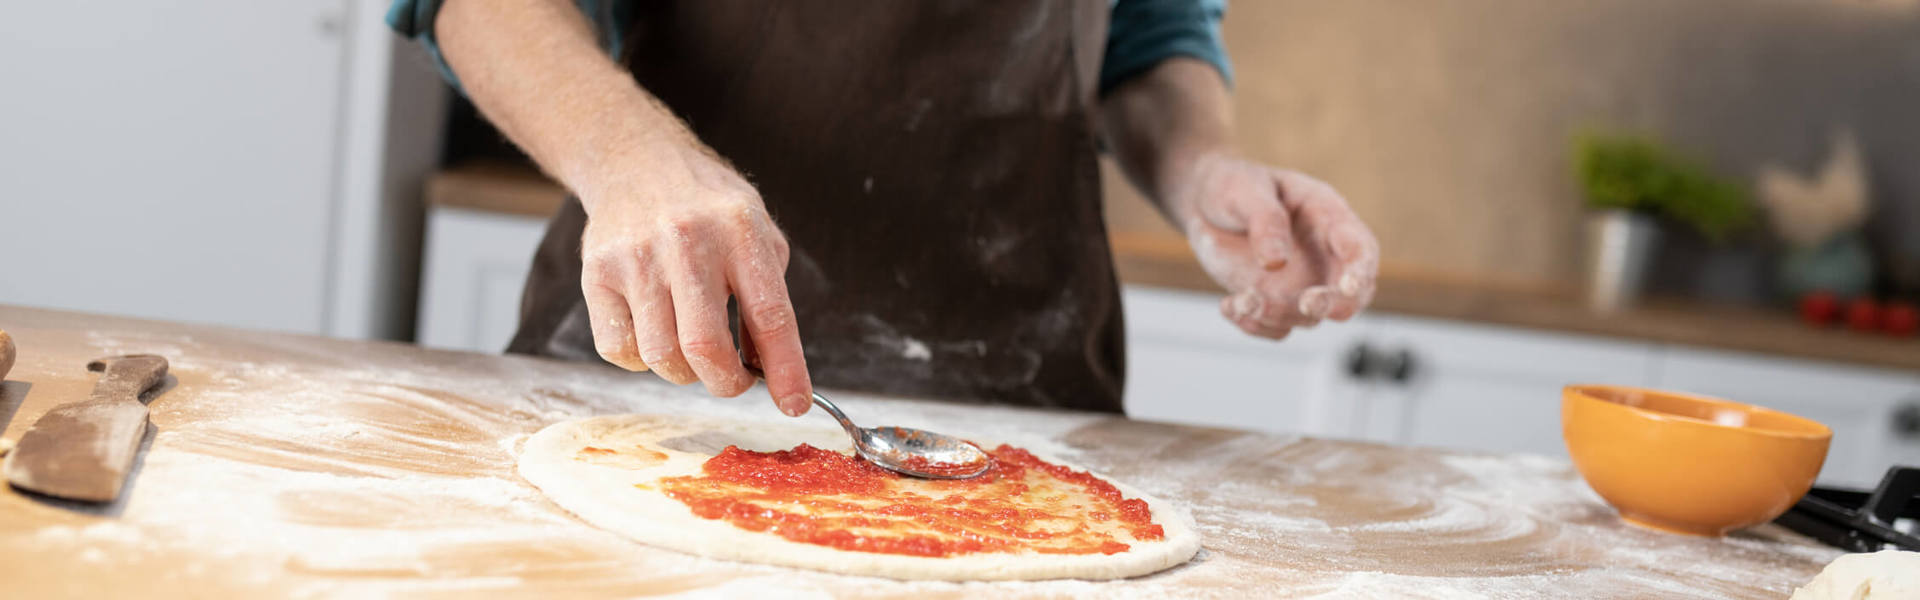 someone spreading tomato passata on a pizza dough base on a floured surface with a spoon